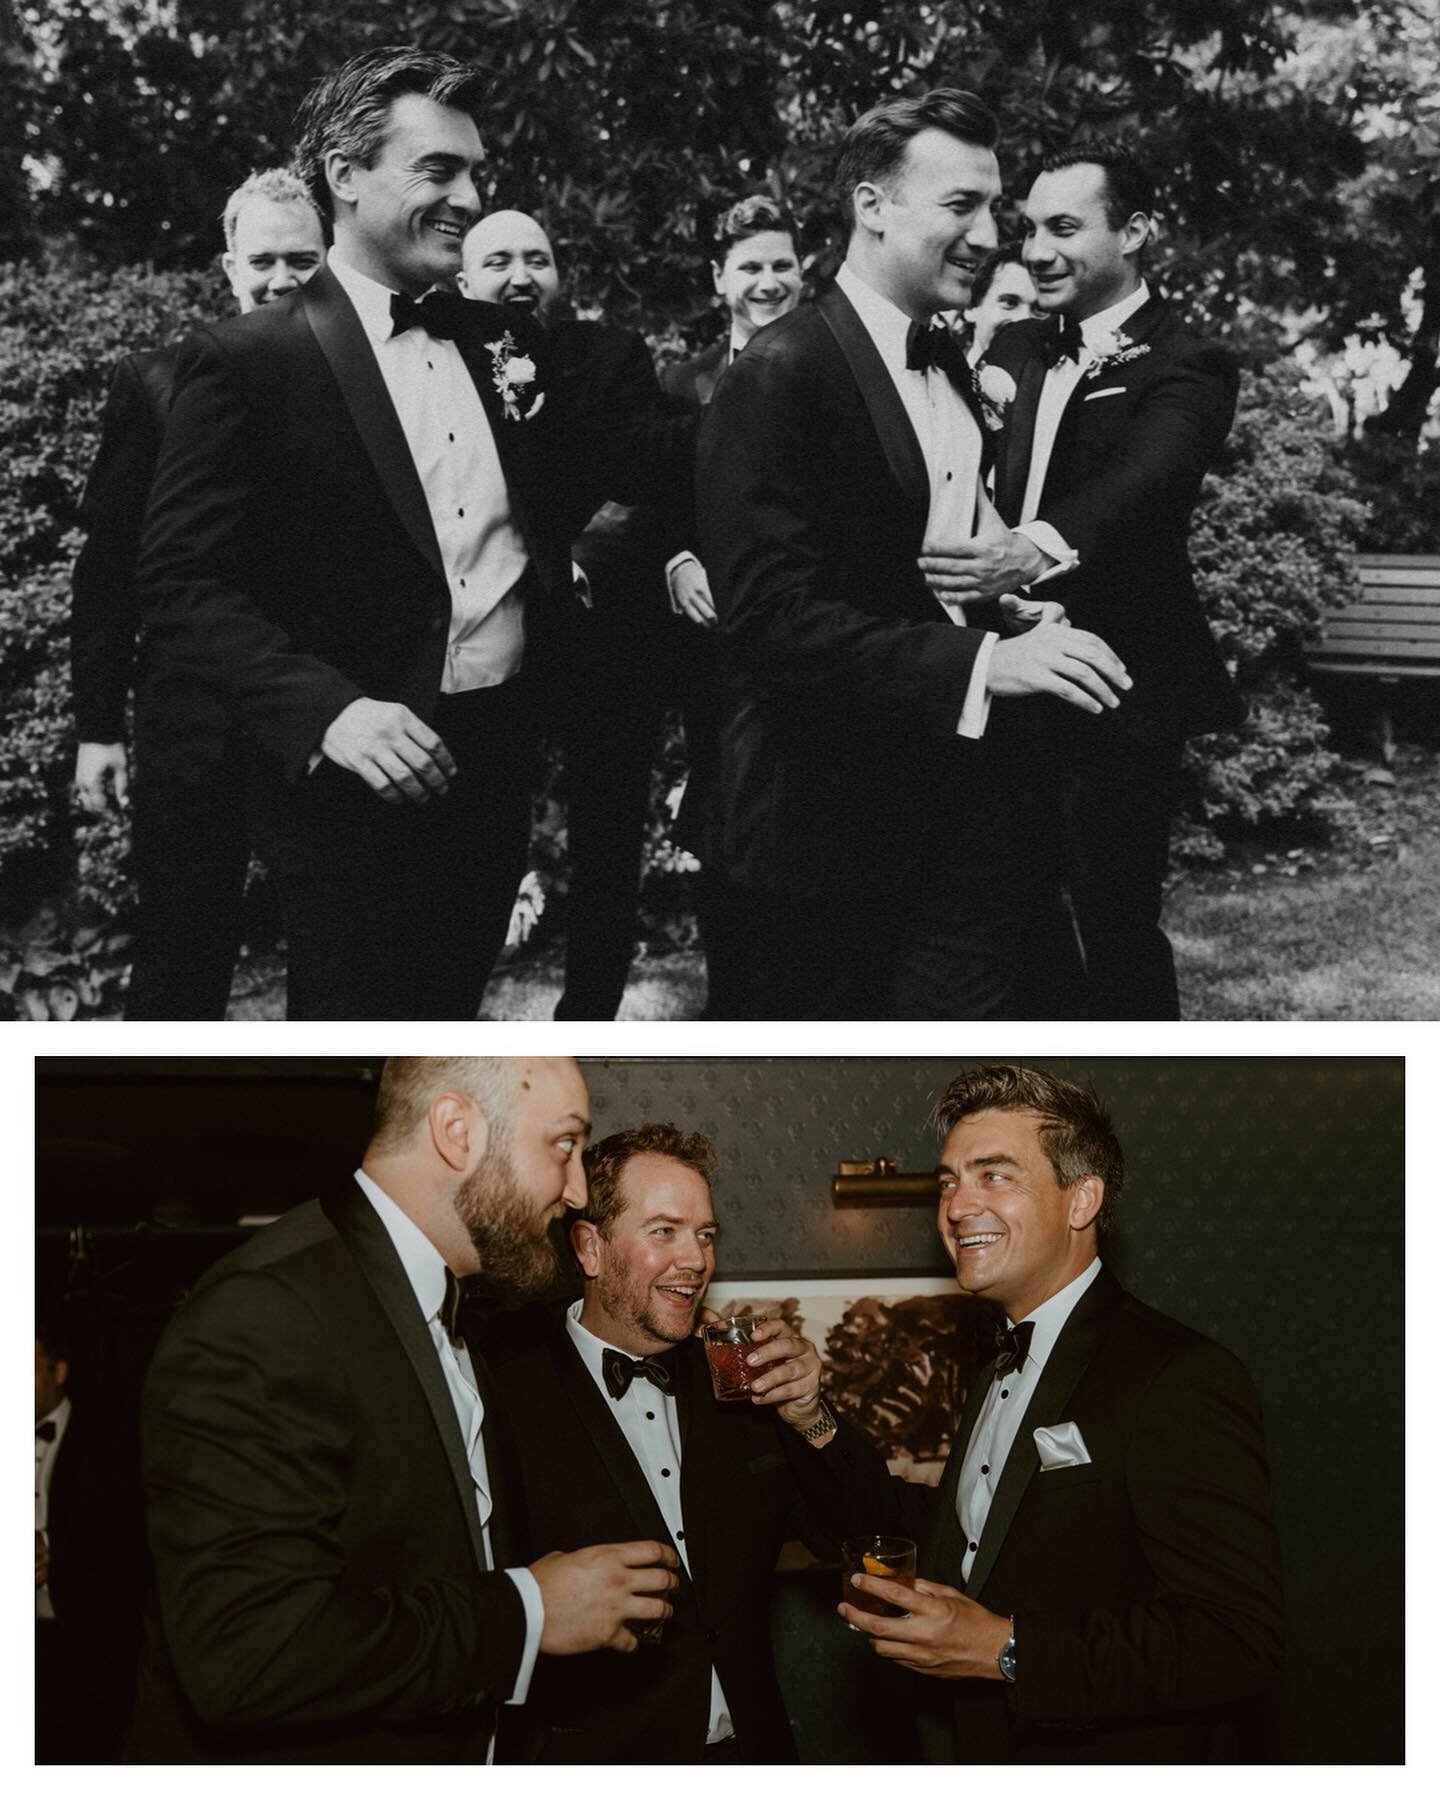 Loving the cheeky moments these Aussie boys were having together, and looking ever so dapper ✨
SS for the lovely @kylencamille 
:
:
:
:
:
#australianweddingphotographer
#scotlandweddingphotographer
#blacktiewedding 
#ukweddingphotographer
#britishwed